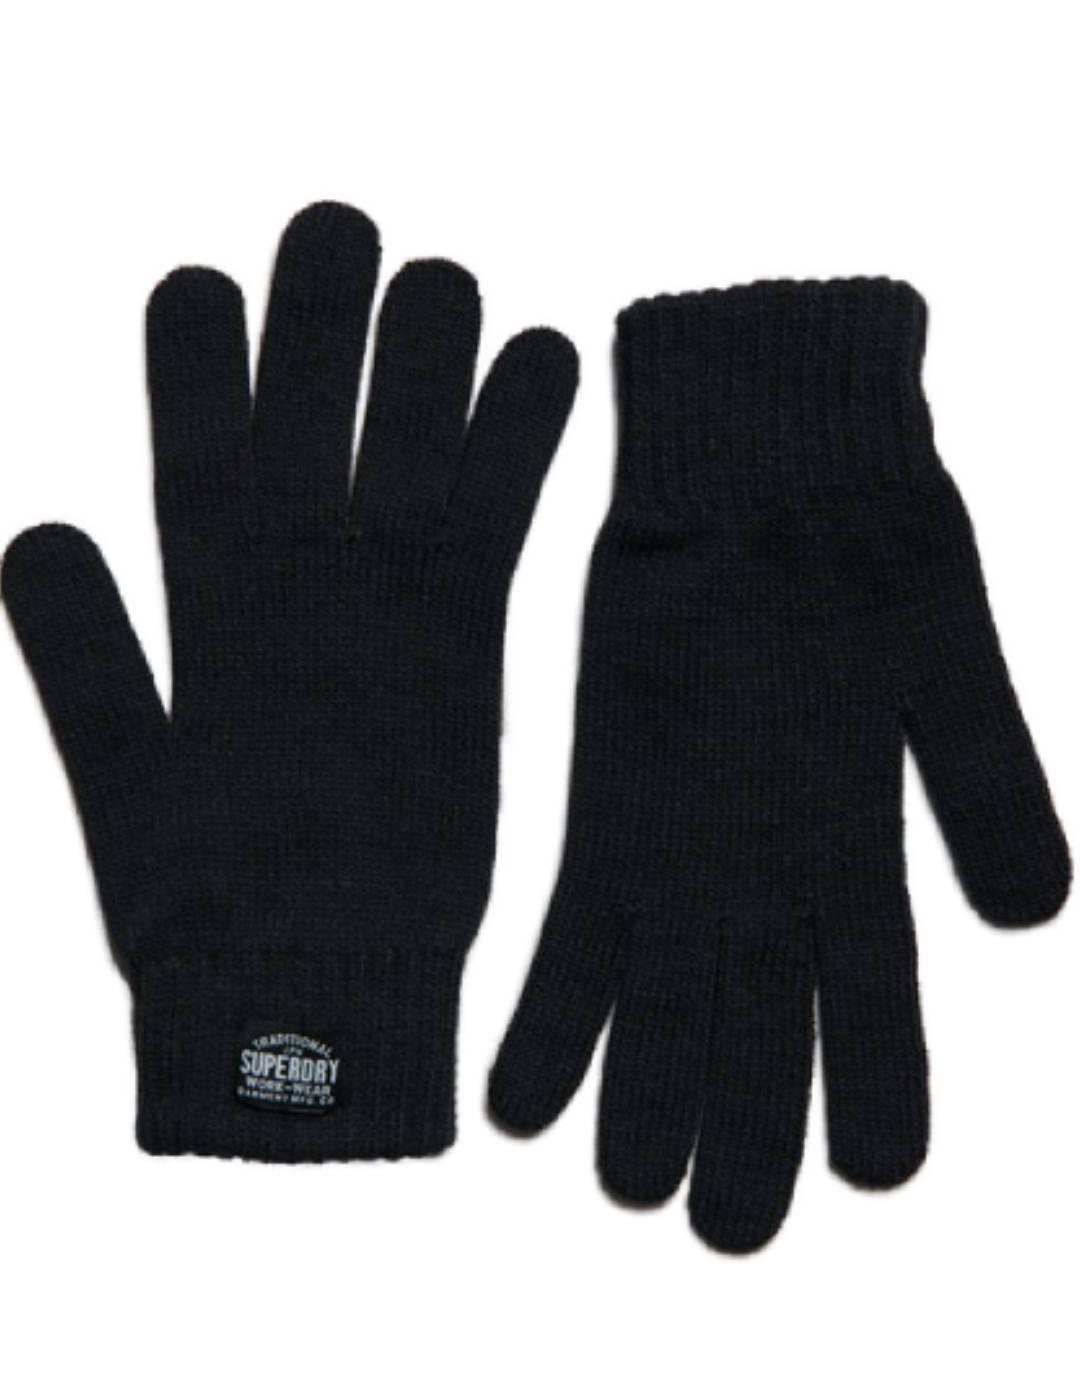 Guantes Superdry Classic negro con parche para mujer